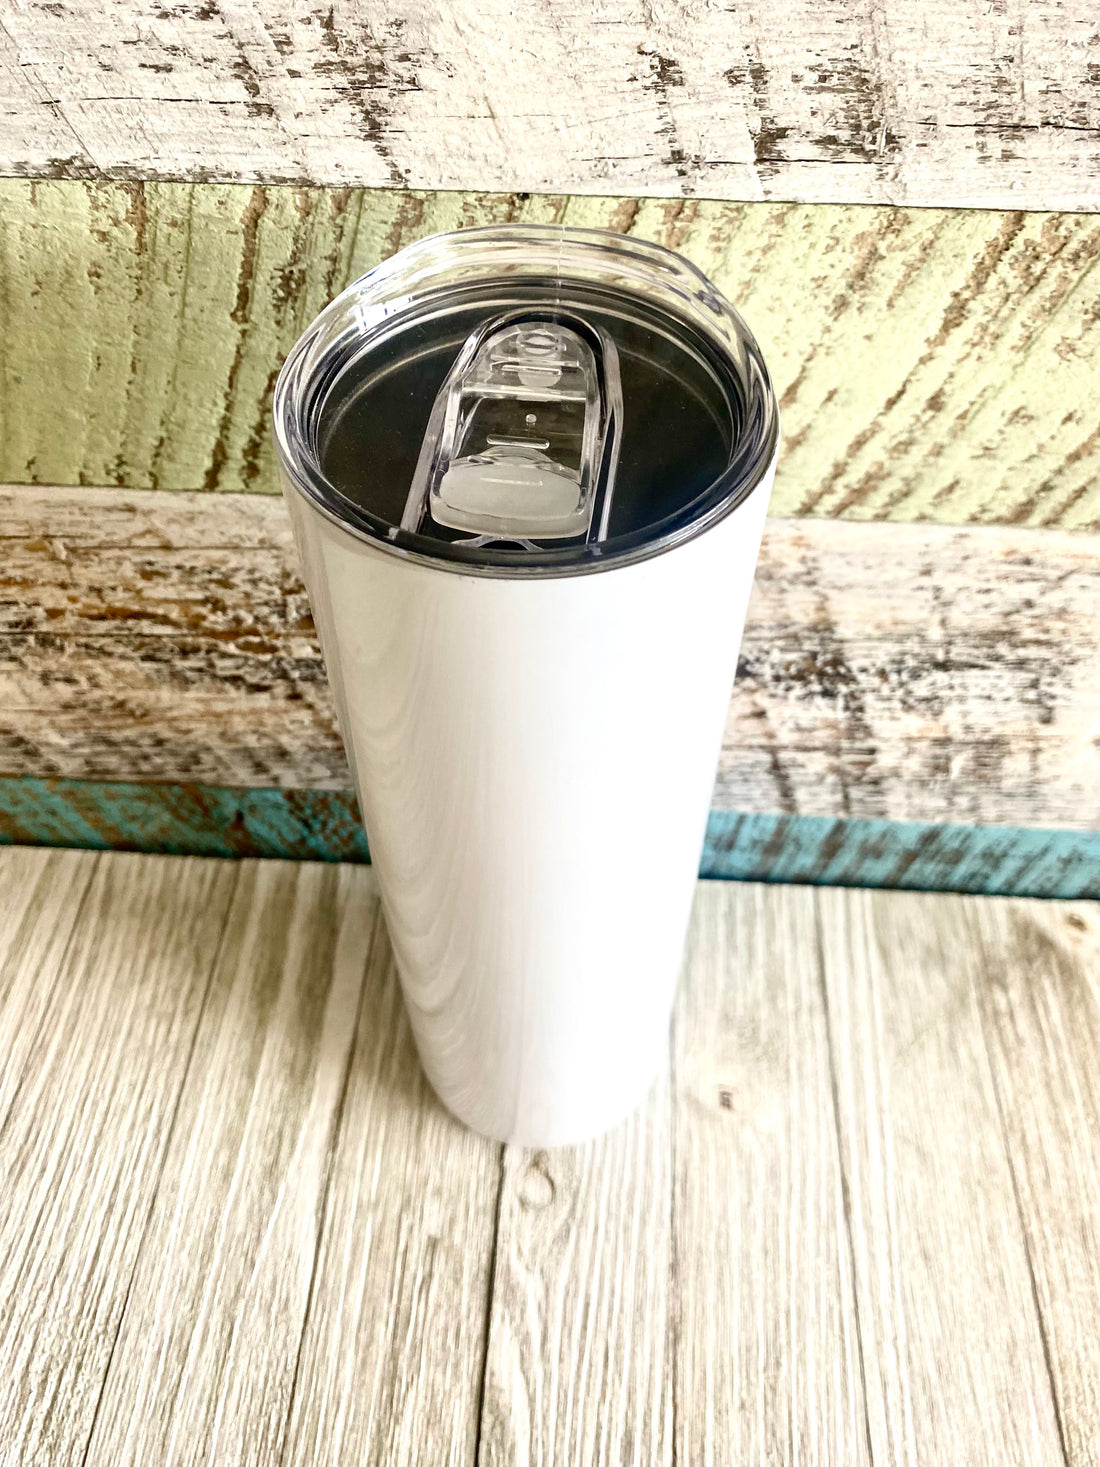 Sublimation Tumbler, Skinny Tumbler, 30oz Tumbler, White Tumbler, Custom Drinkware, Personalized Tumbler, Stainless Steel Tumbler, Thermal Insulated Cup, Sublimation Printing, Drinkware Gifts, High-Quality Tumbler, Double-Walled Tumbler,